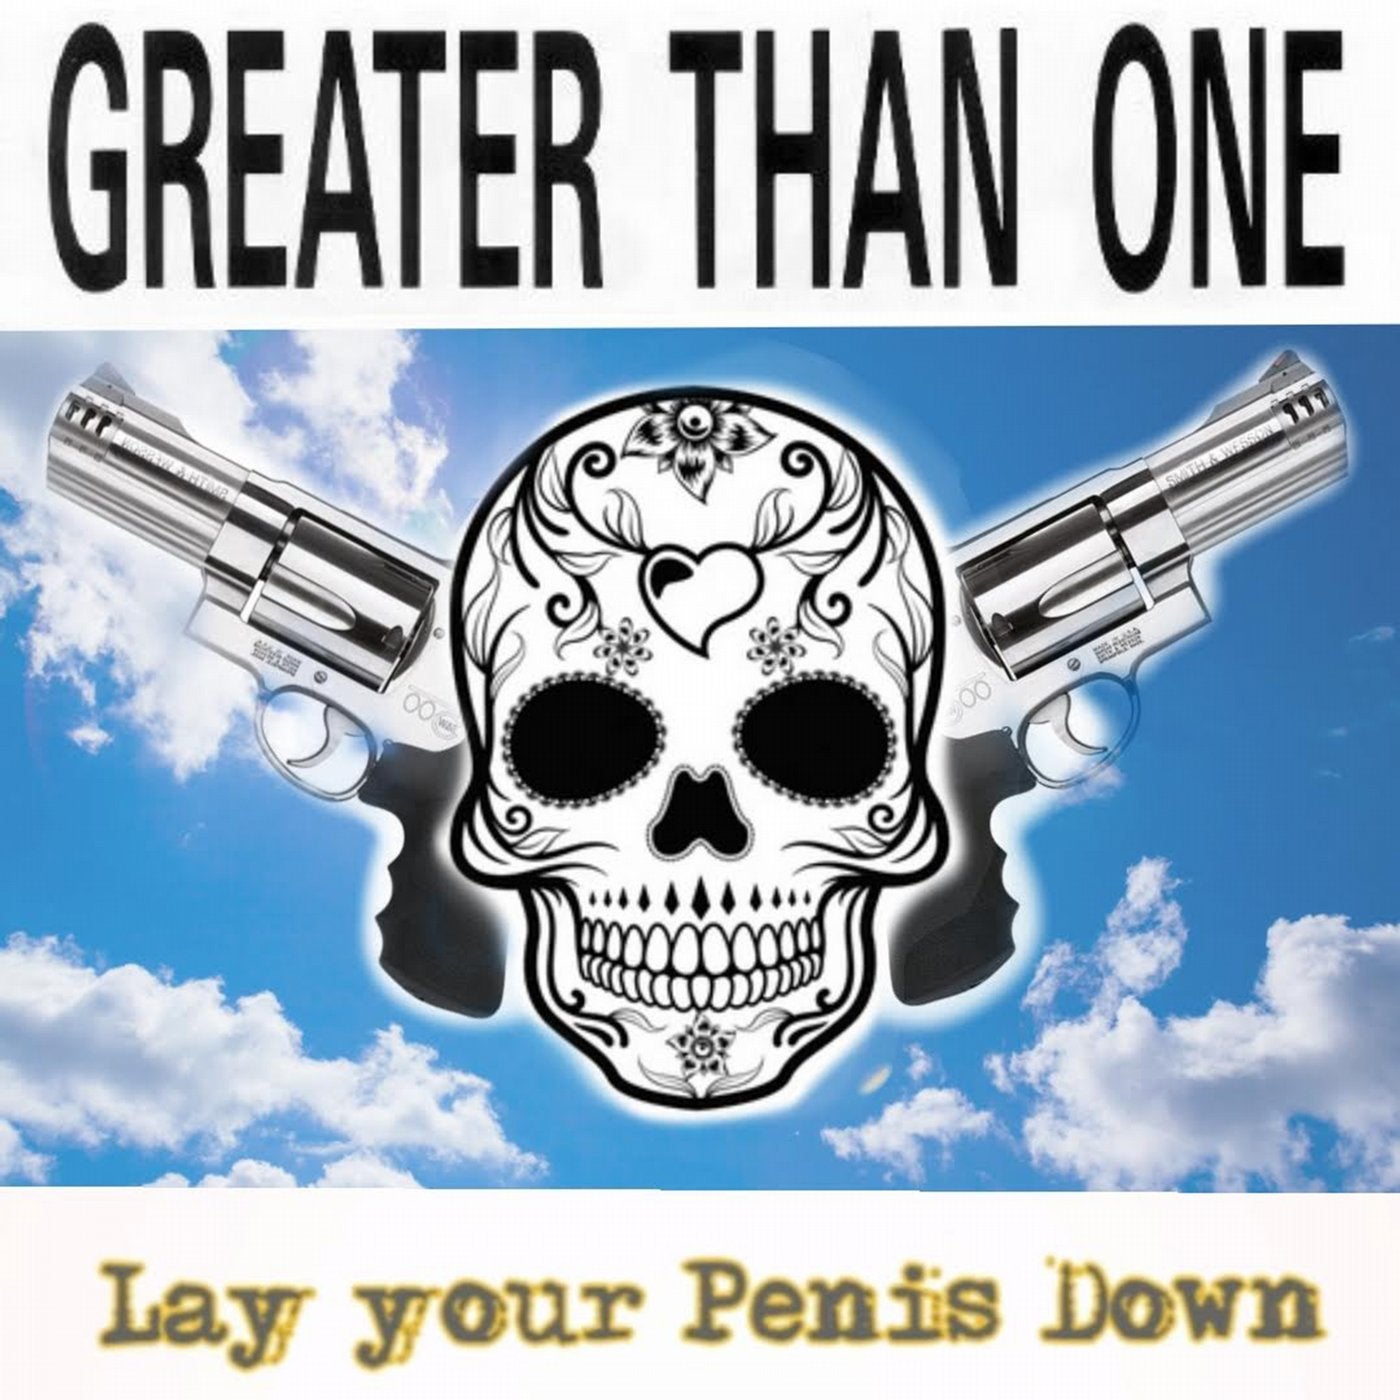 Lay Your Penis Down